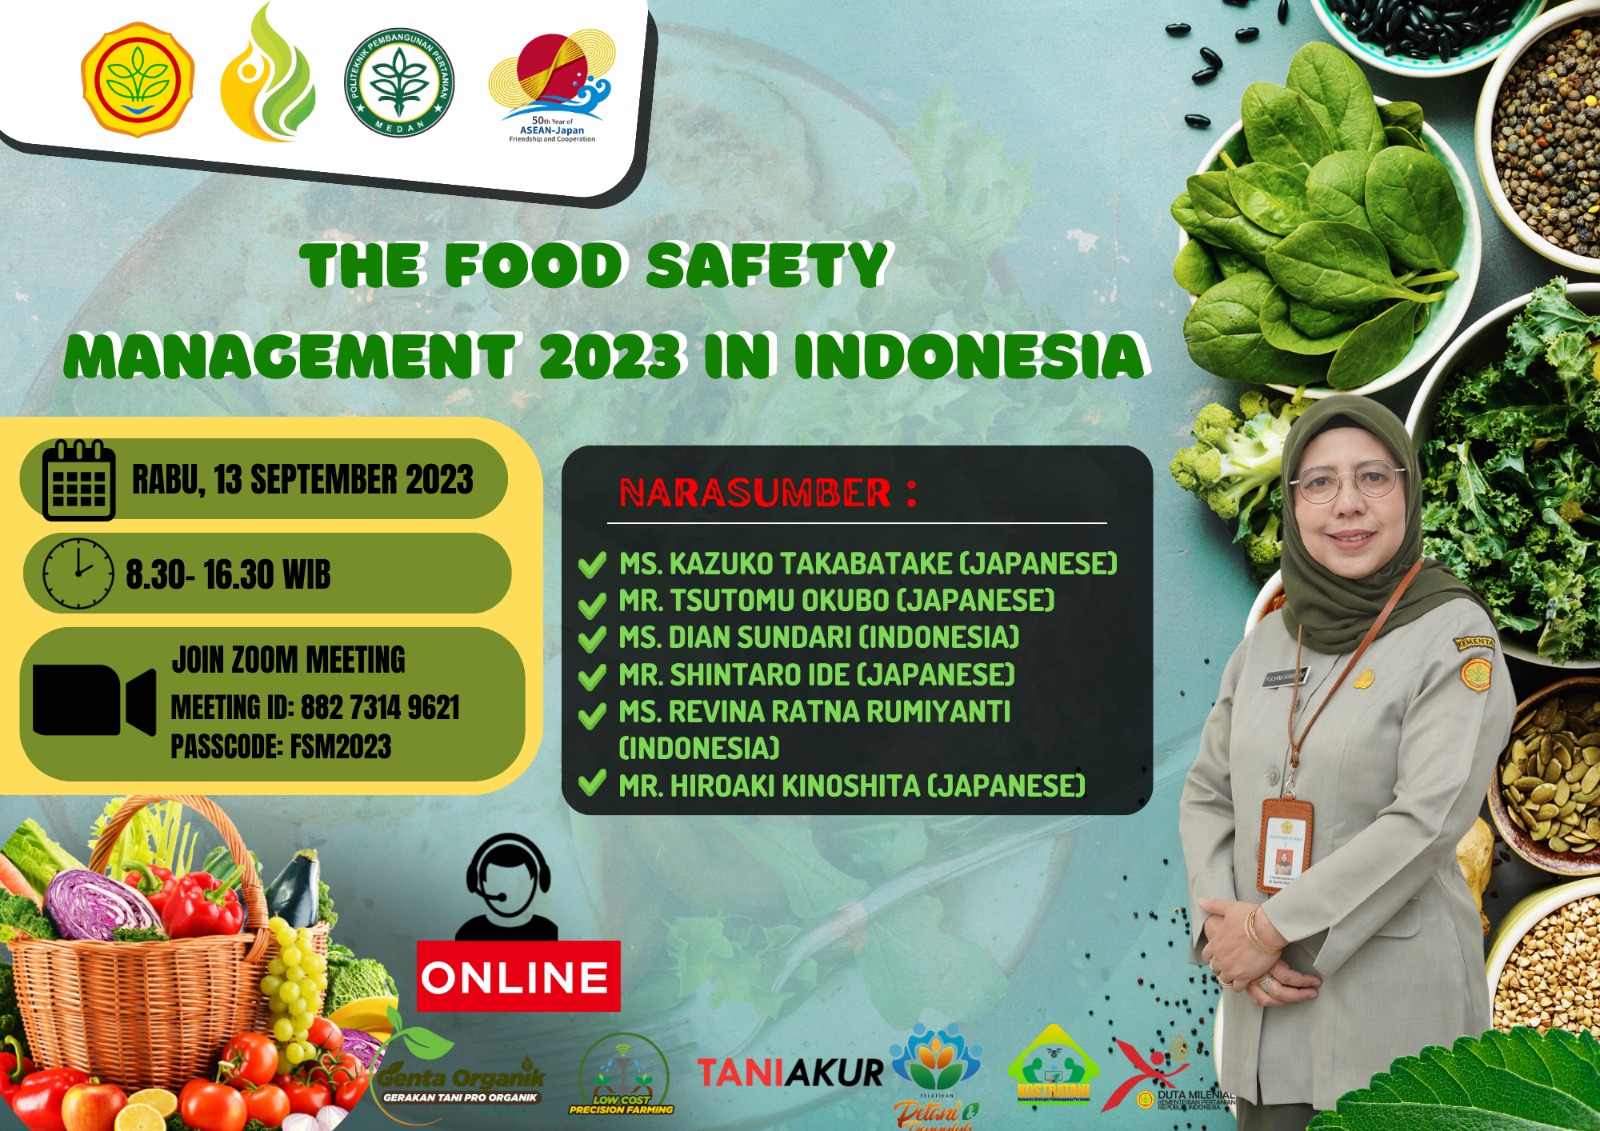 The Food Safety Management 2023 in Indonesia